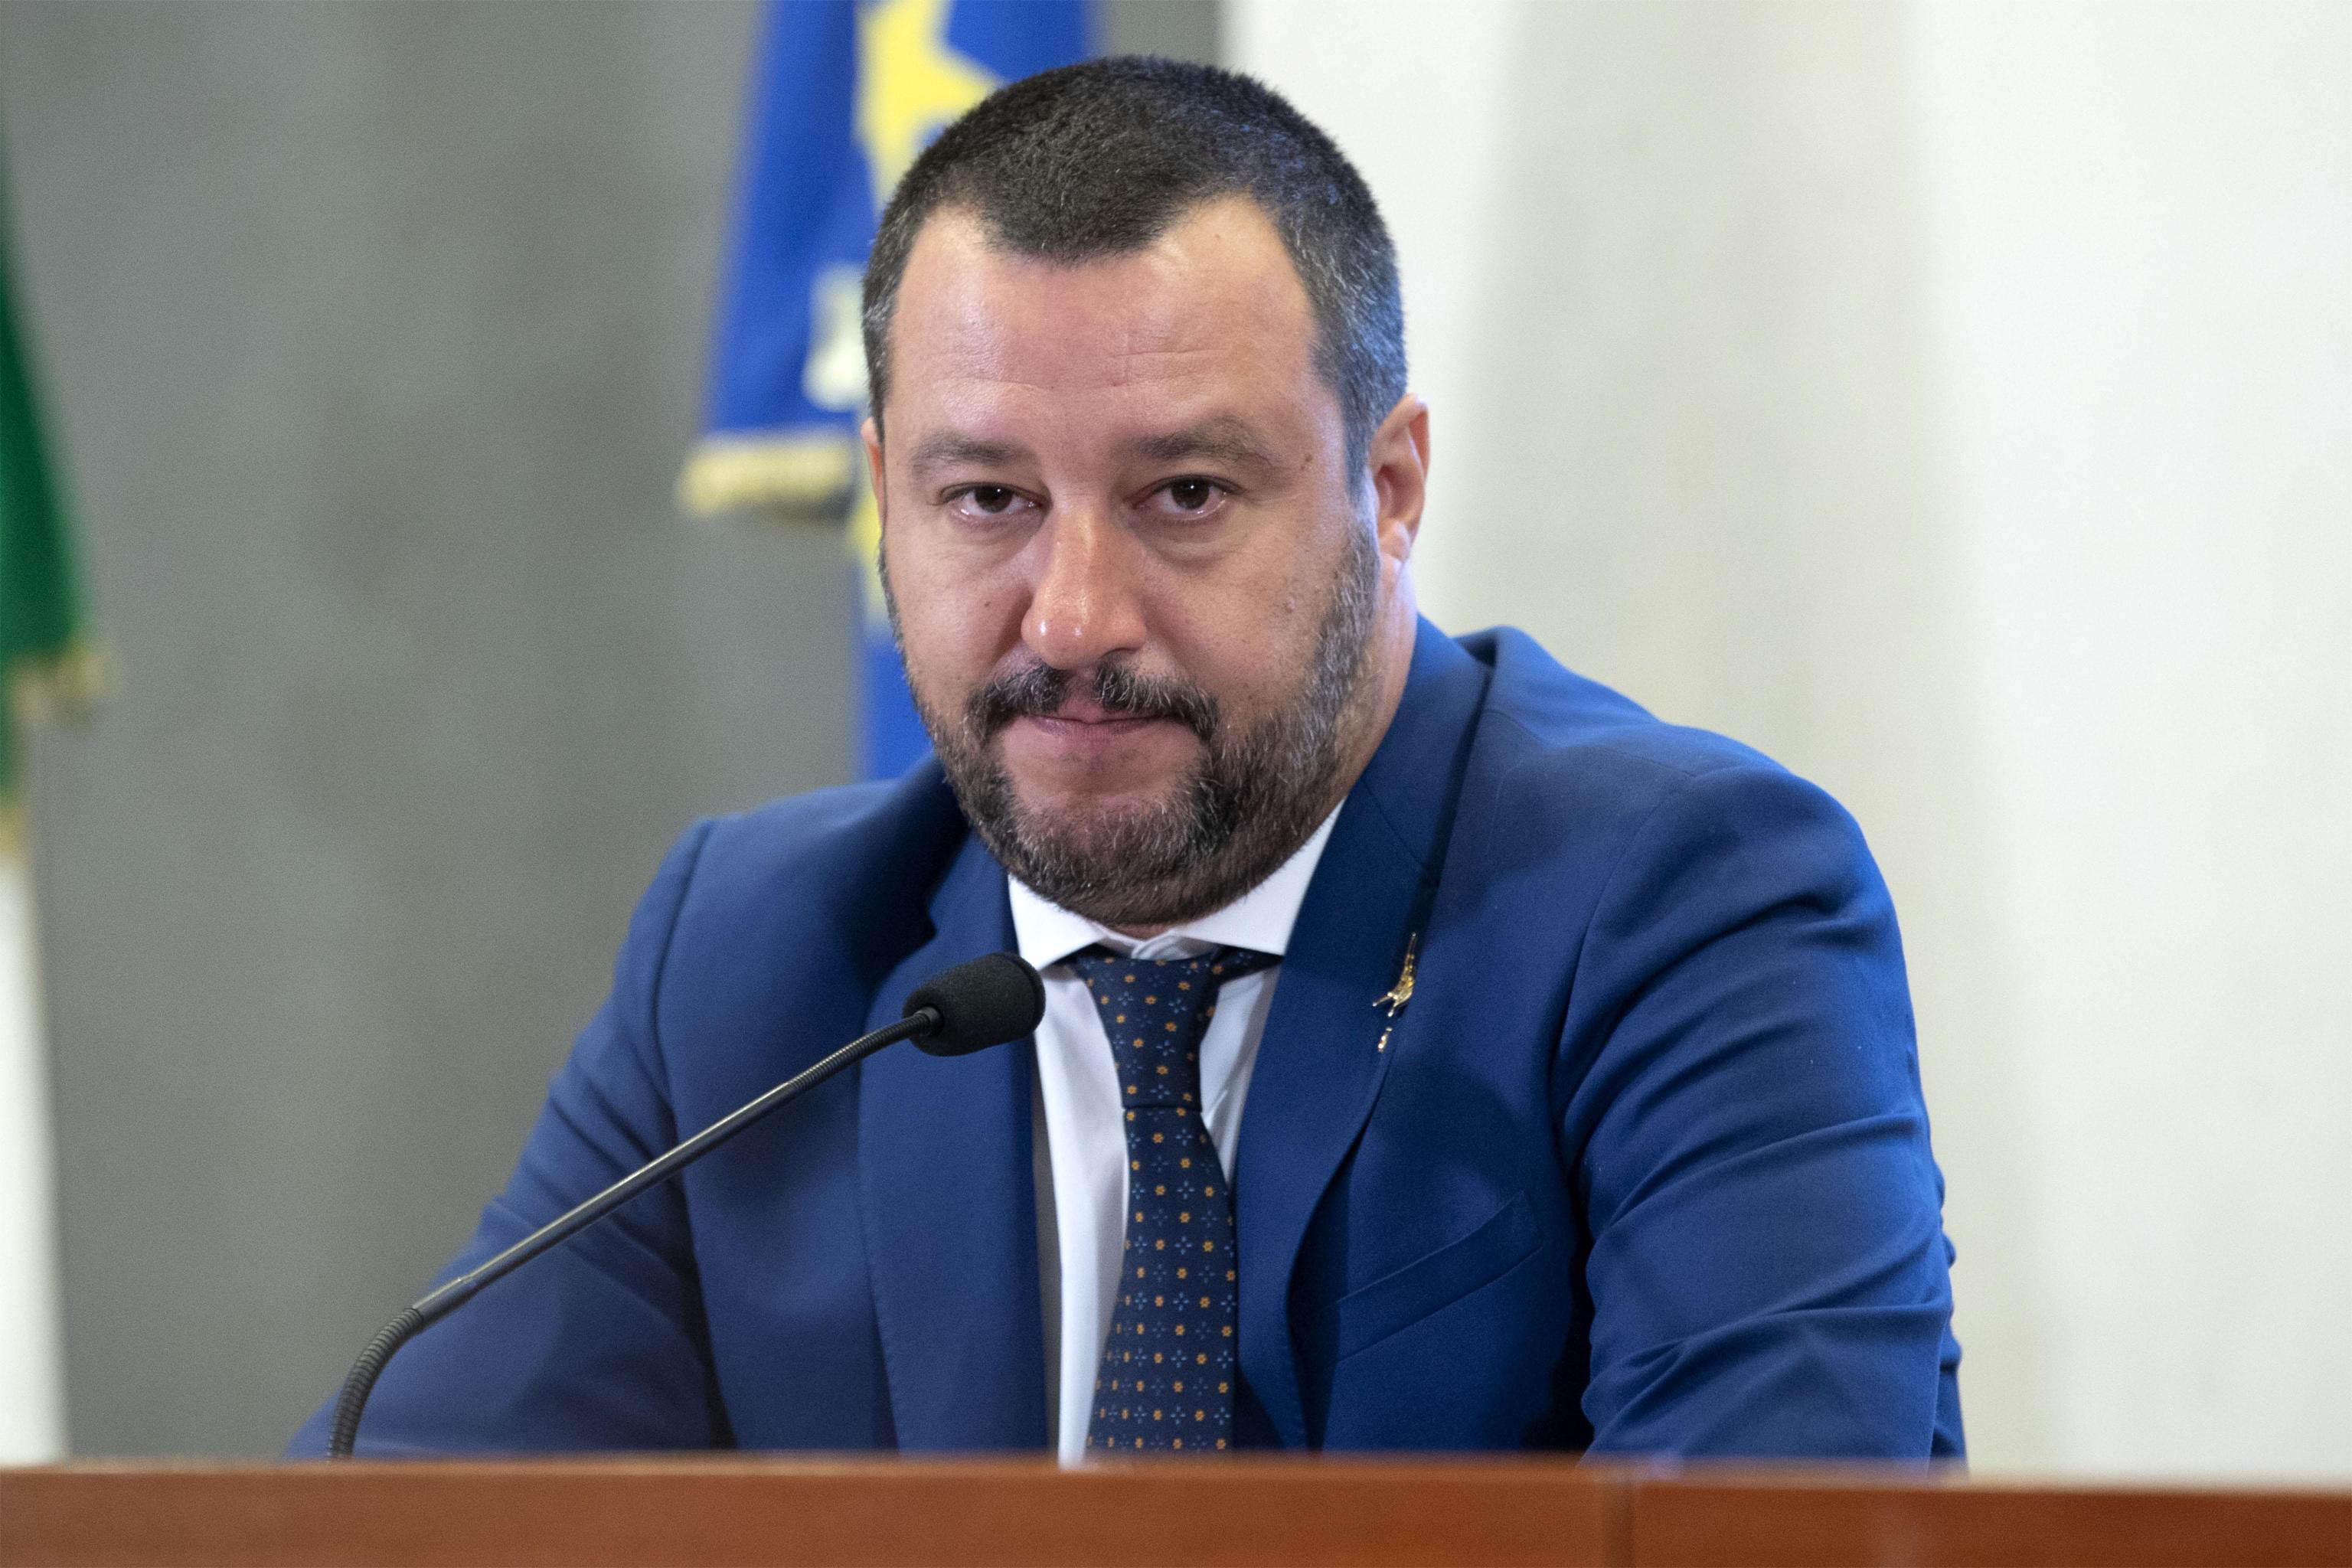 epa07000599 Italian Interior Minister, Matteo Salvini speaks with journalists during a press conference in Rome, Italy, 06 September 2018. Deputy Premier and Interior Minister Matteo Salvini said that he was not worried after a Genoa court okayed the seizure of funds from his League party over a fraud case.  EPA/MASSIMO PERCOSSI